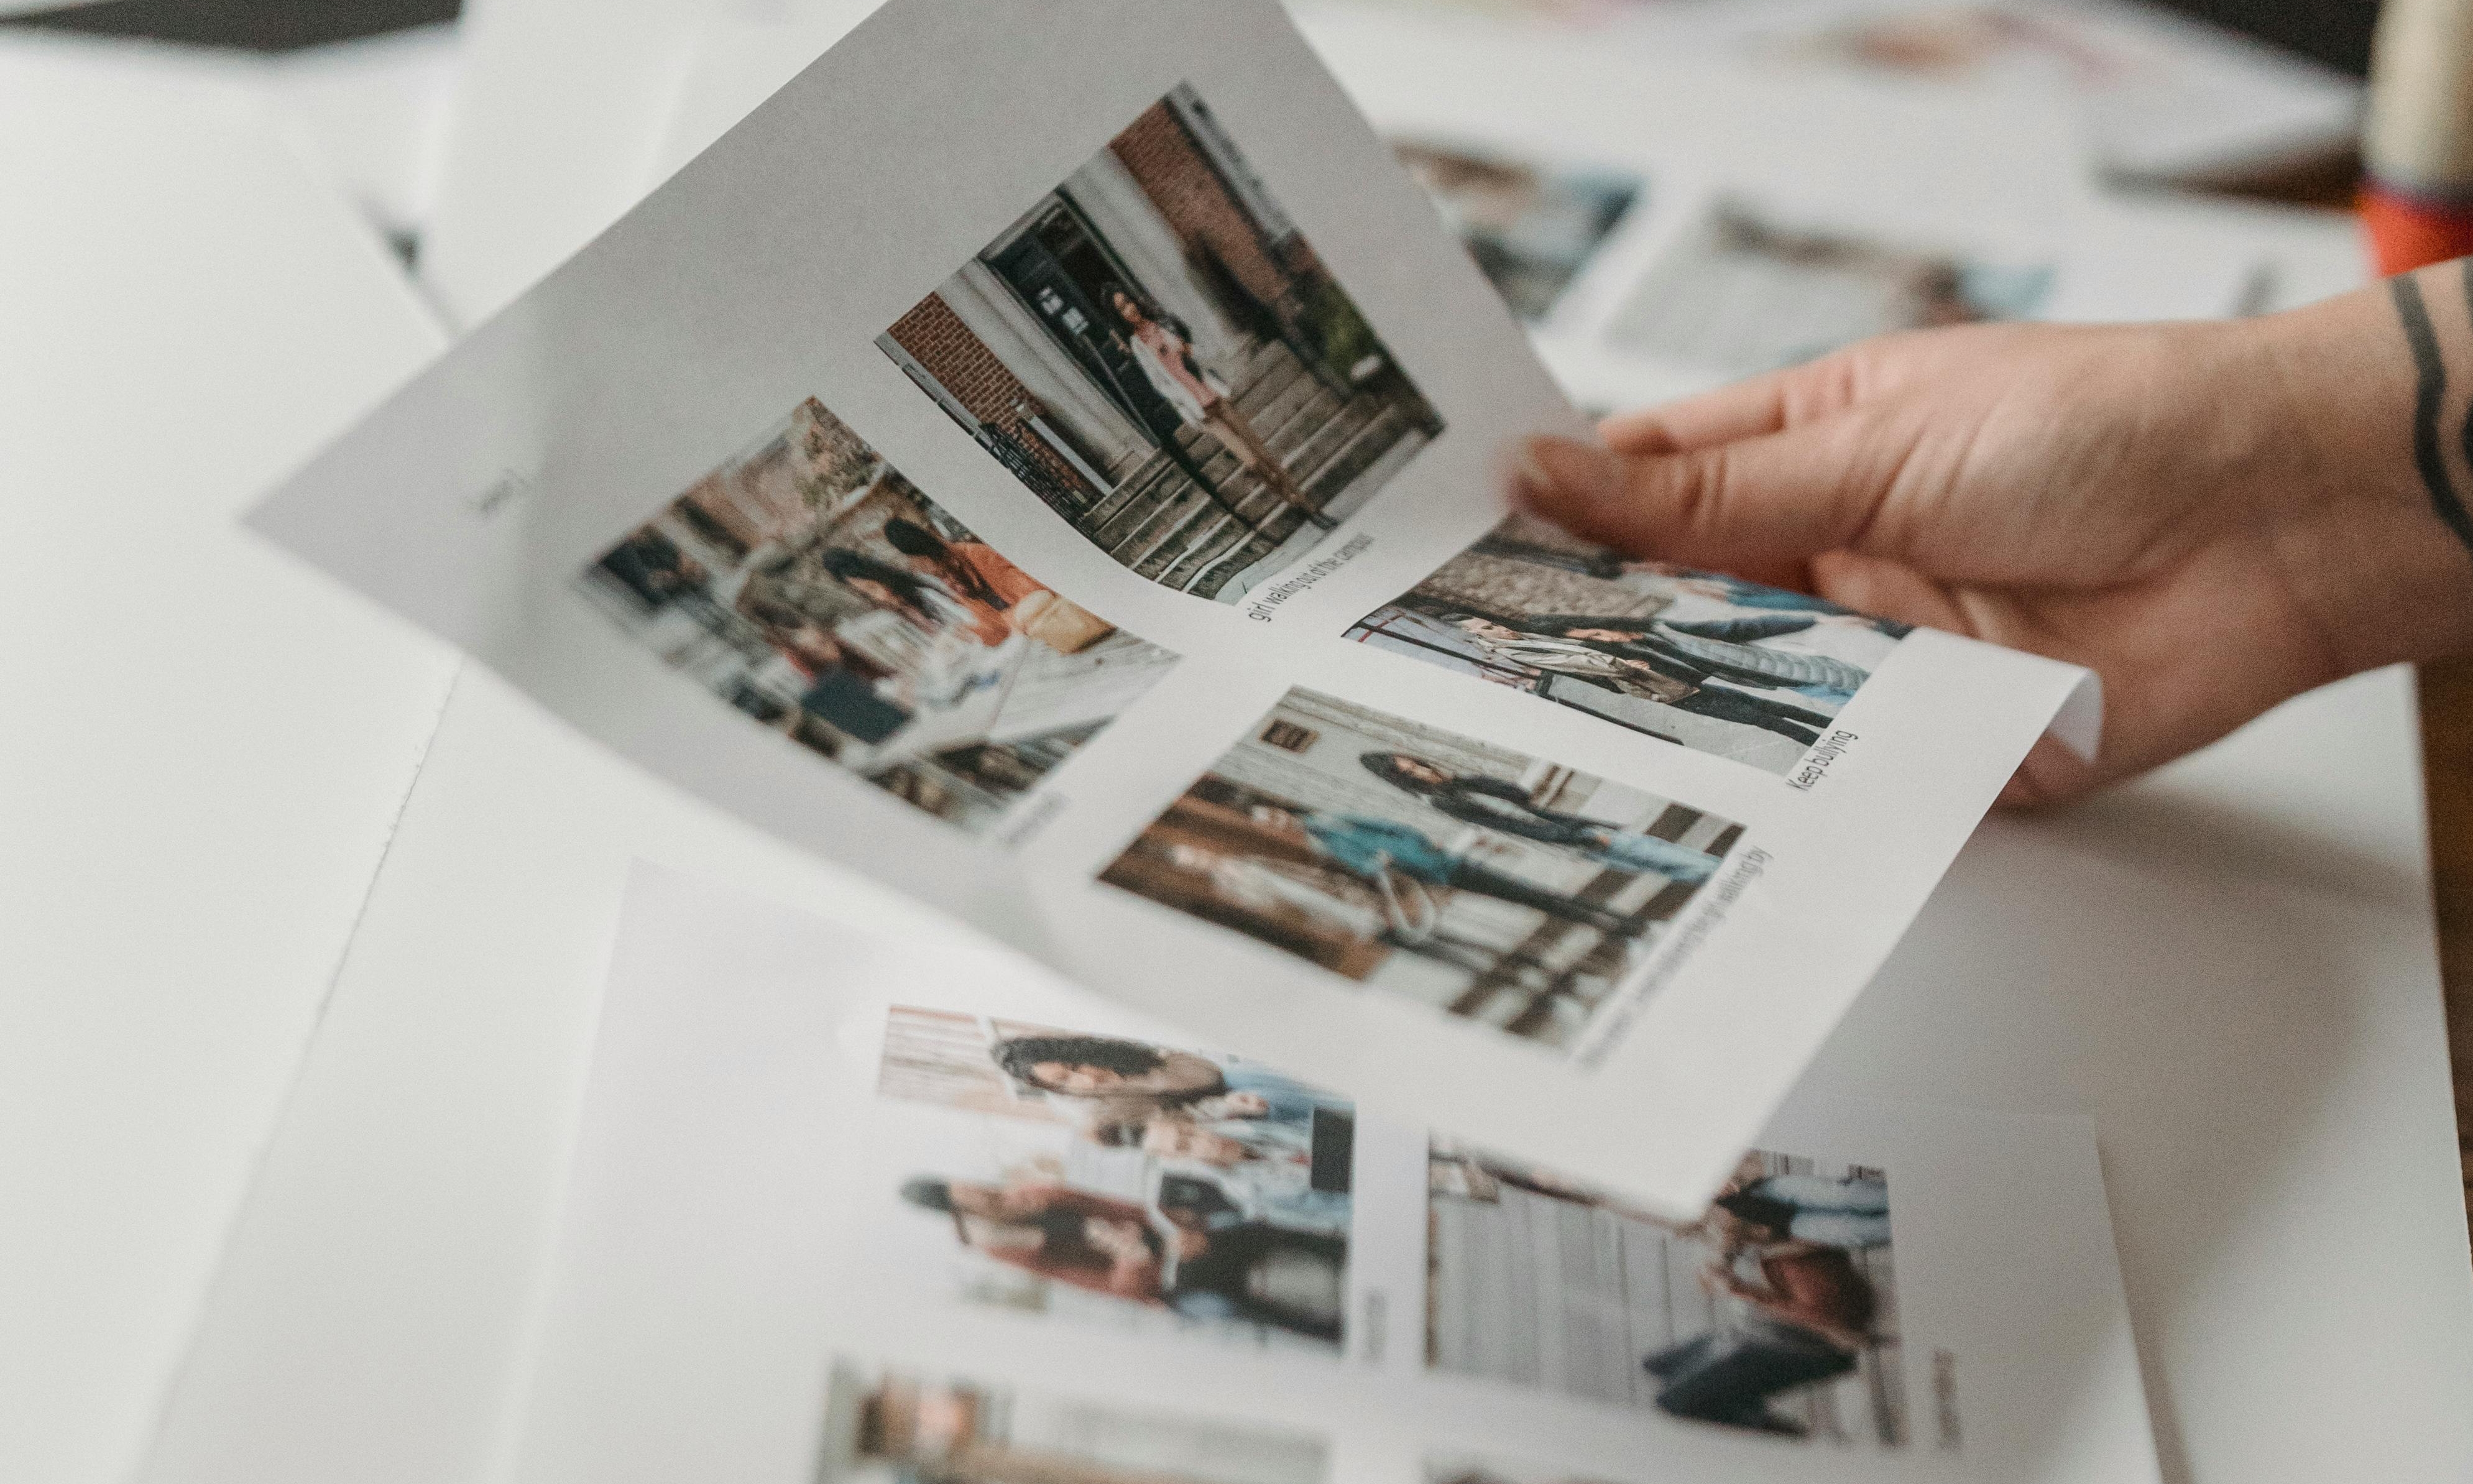 A hand holding a page of printed photos | Source: Pexels